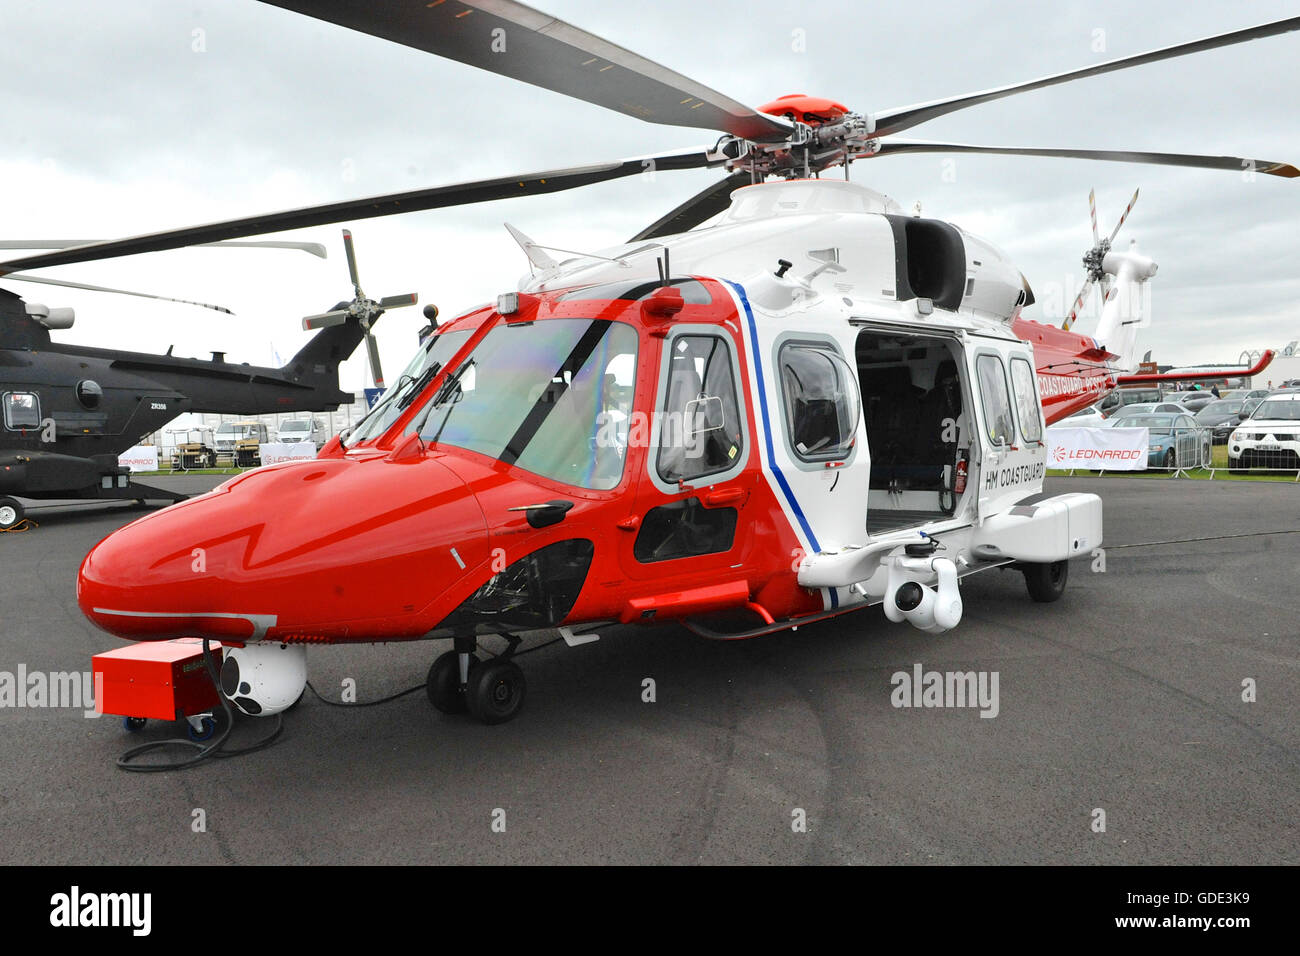 Farnborough, UK. 15th July, 2016. A Finmeccanica AW189 twin-engine helicopter on display at the Farnborough International Airshow (FIA) which took place today in Farnborough, UK.  The air show, a biannual showcase for the aviation industry, is the biggest of it's kind and attracts civil and military buyers from all over the world. trade visitors are normally in excess of 100,000 people. The show runs until July 17. Credit:  Michael Preston/Alamy Live News Stock Photo